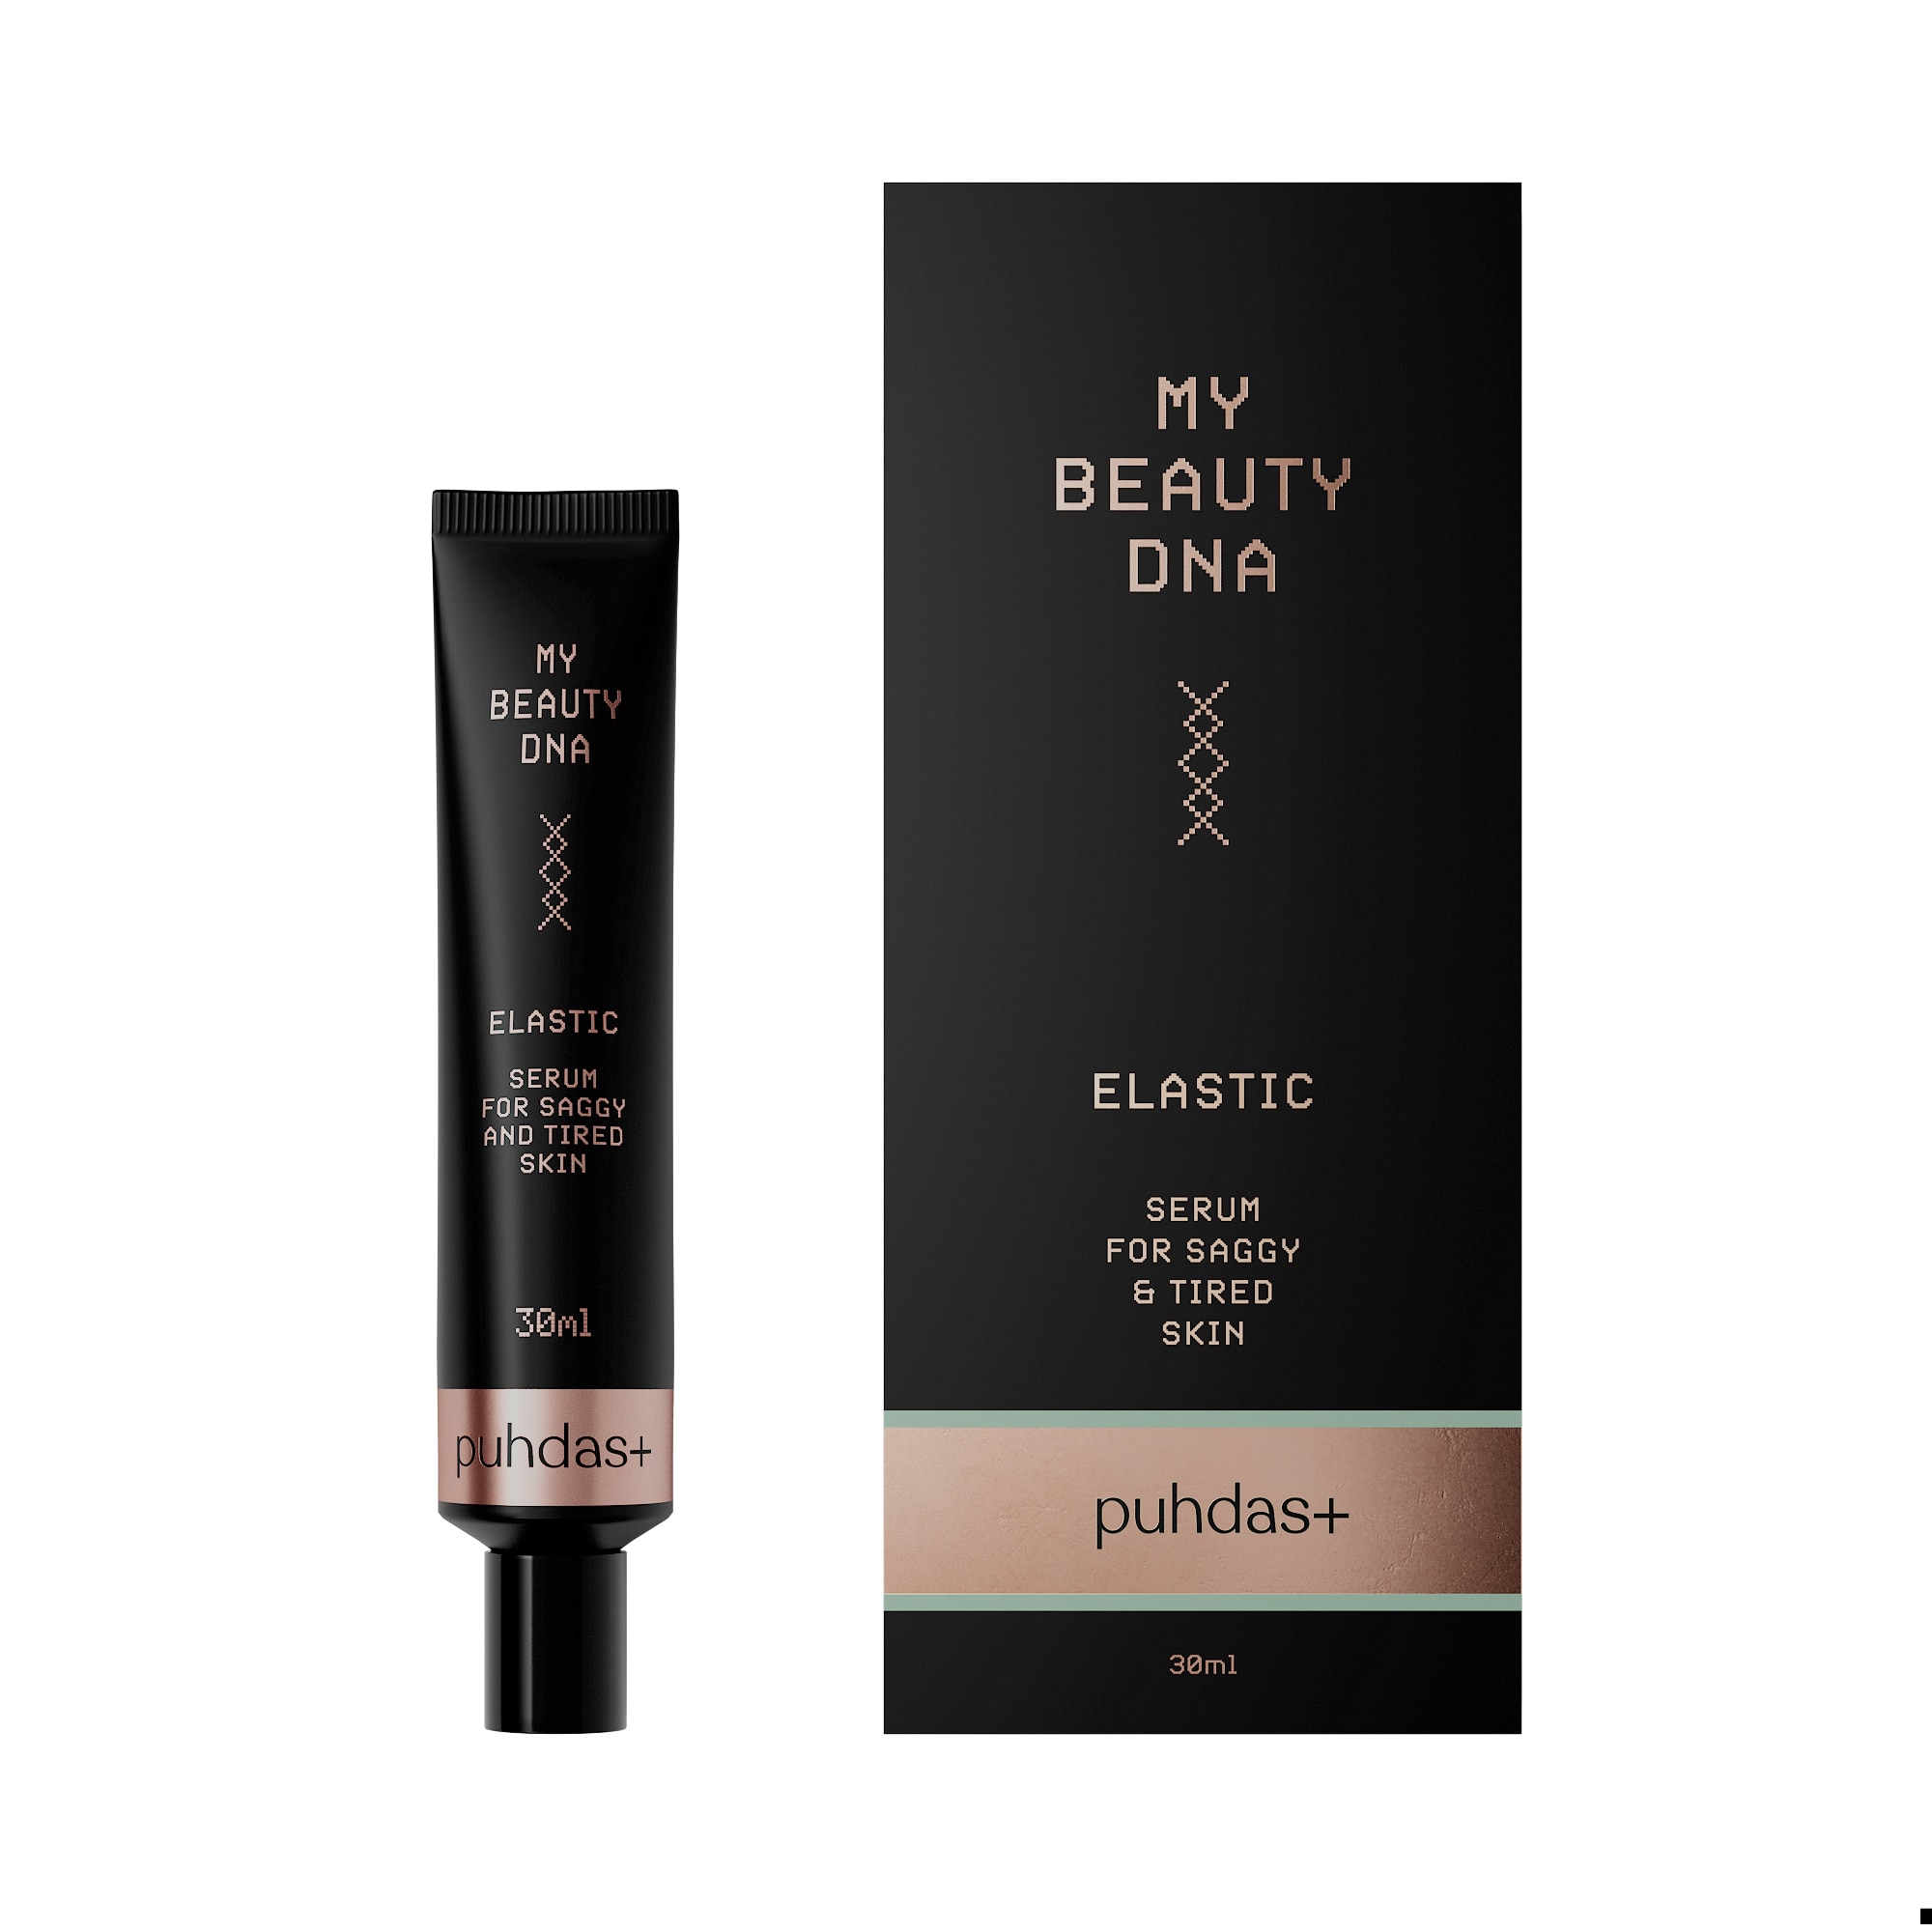 Puhdas+ Beauty DNA Elastic Serum for Saggy and Tired Skin